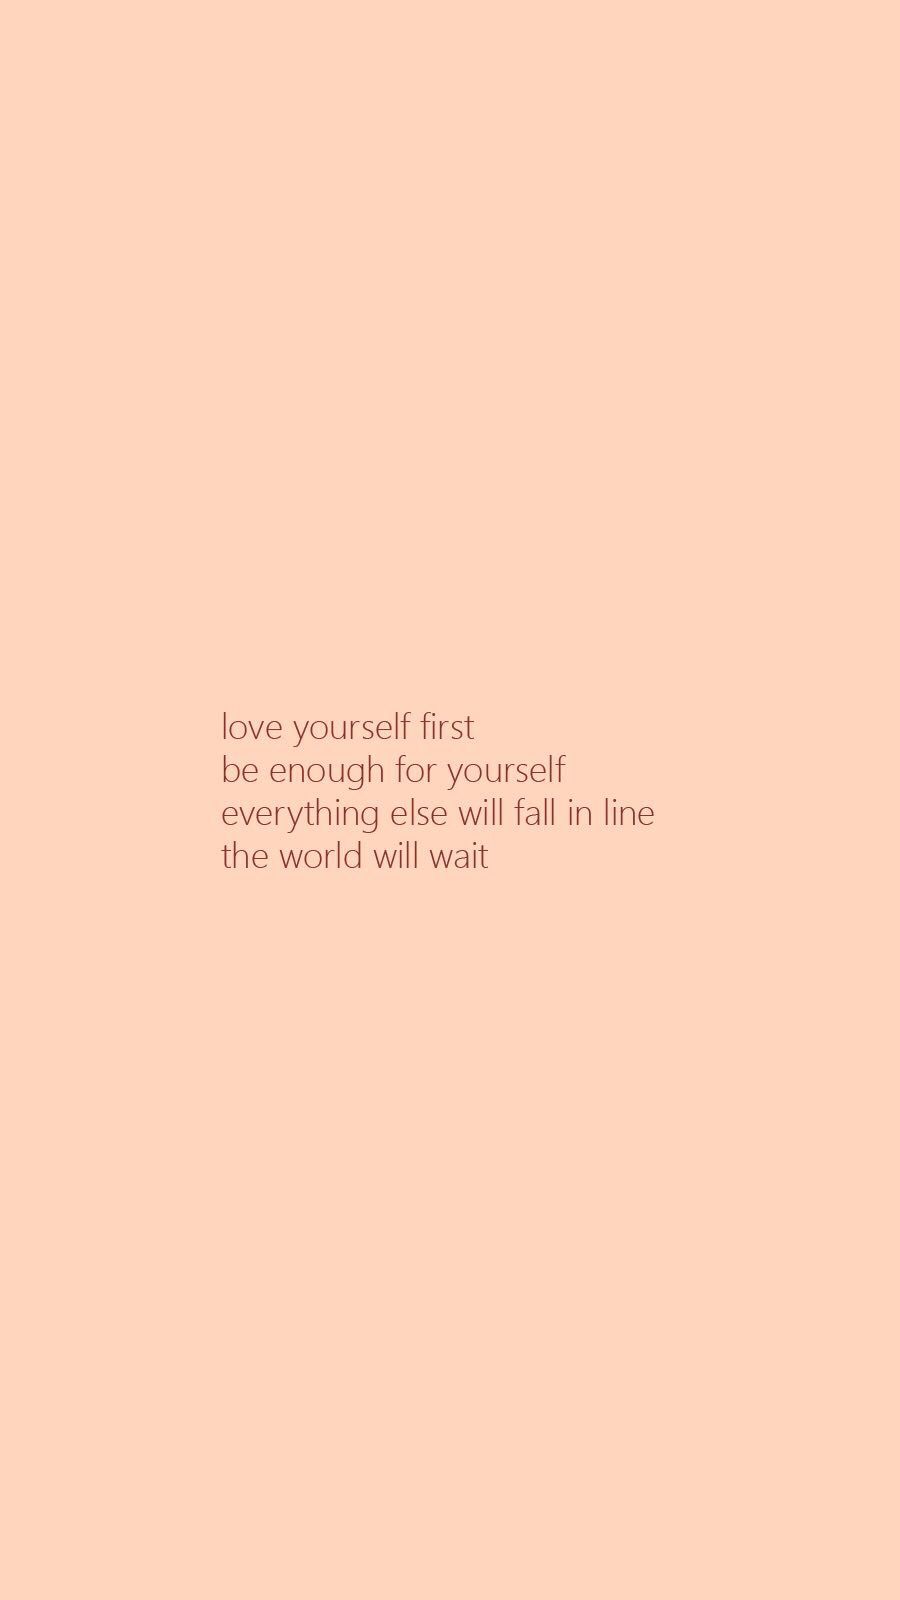 Self love first wallpaper. Self love quotes, Love yourself first quotes, Love you more quotes